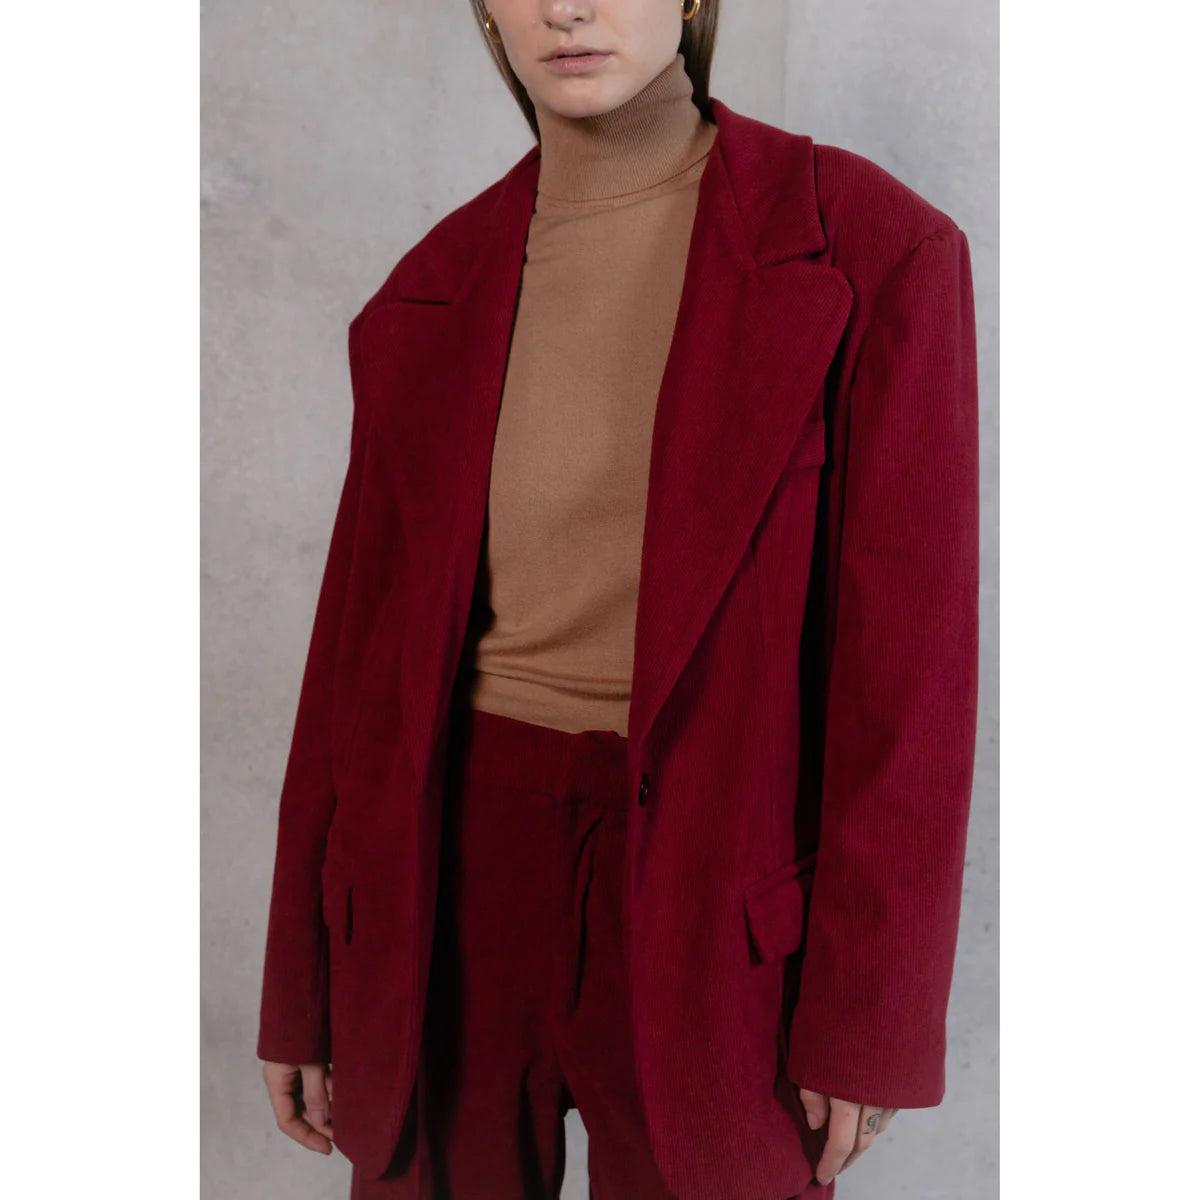 An Unique Color: How to Style Burgundy?